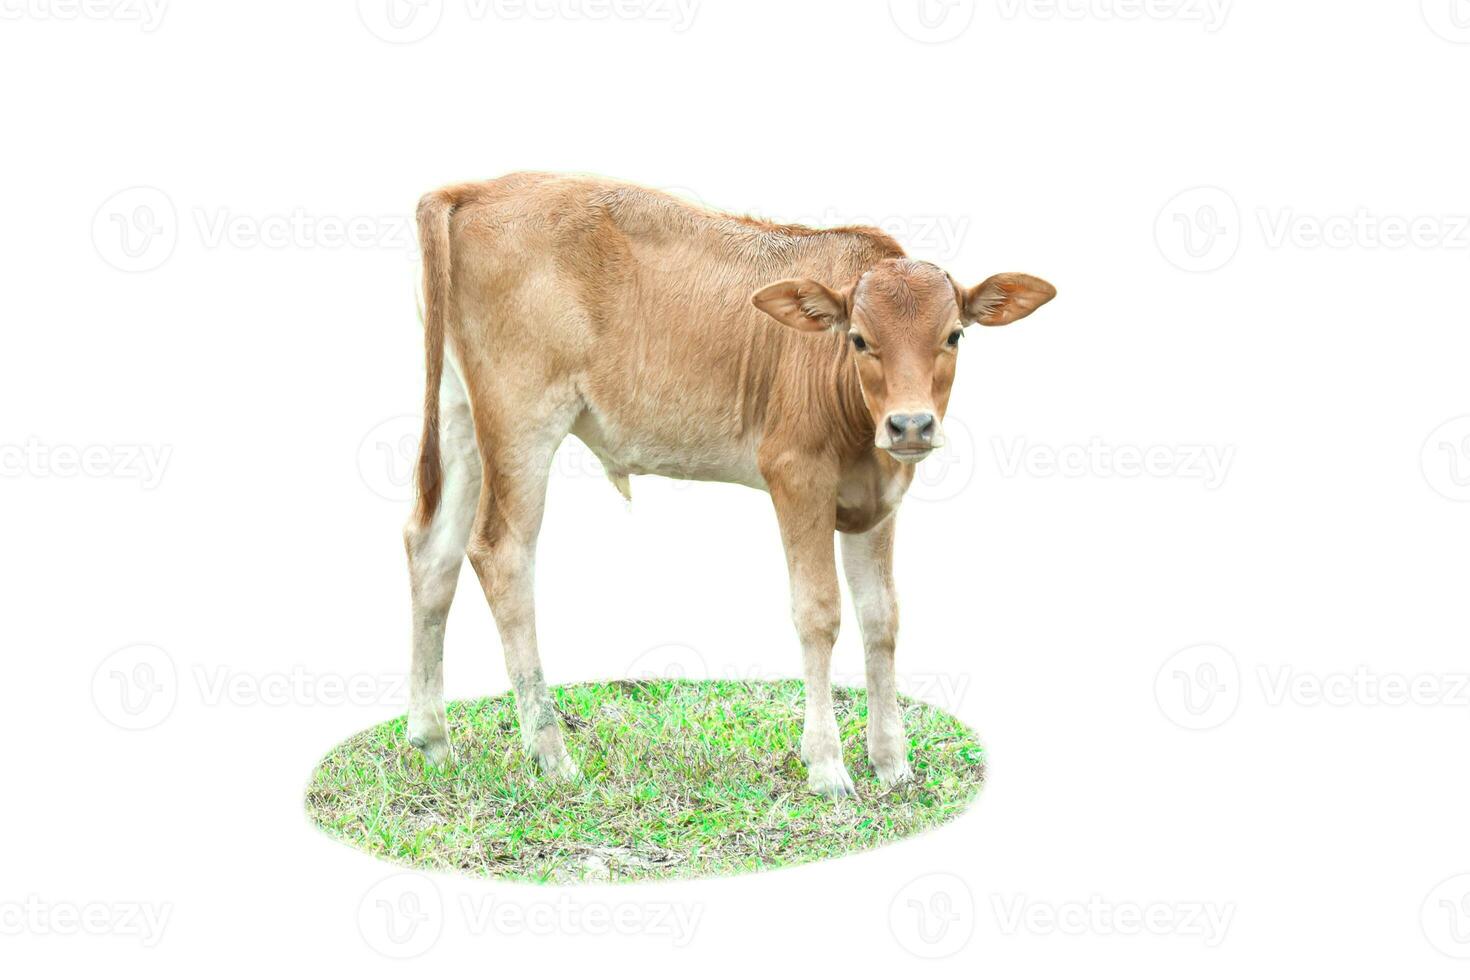 Calf cow on grass isolated on white background. photo